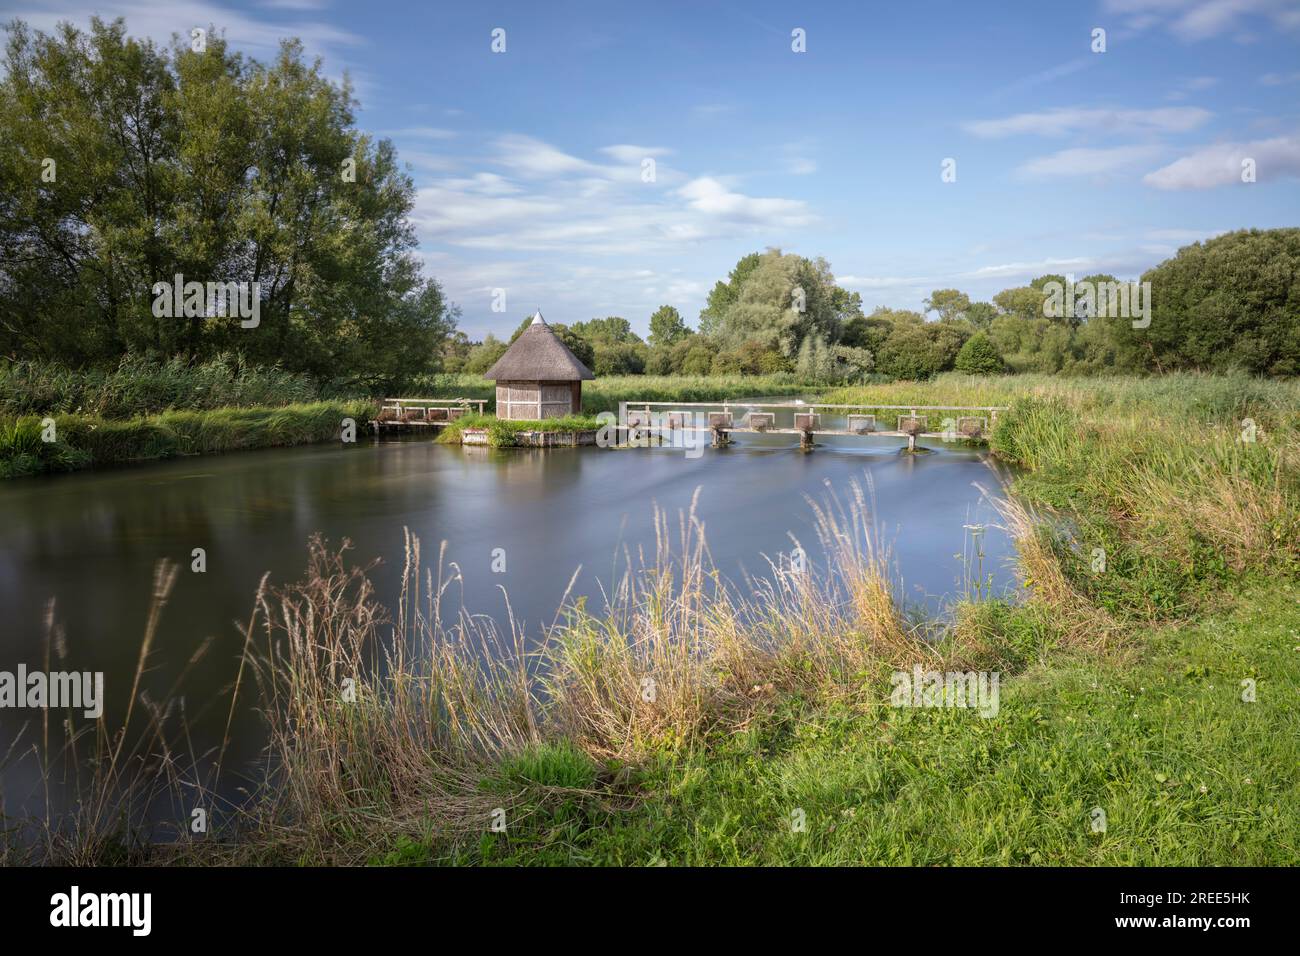 The River Test and thatched fisherman's hut with eel cages, Longstock, Test Valley, Hampshire, England, United Kingdom, Europe Stock Photo